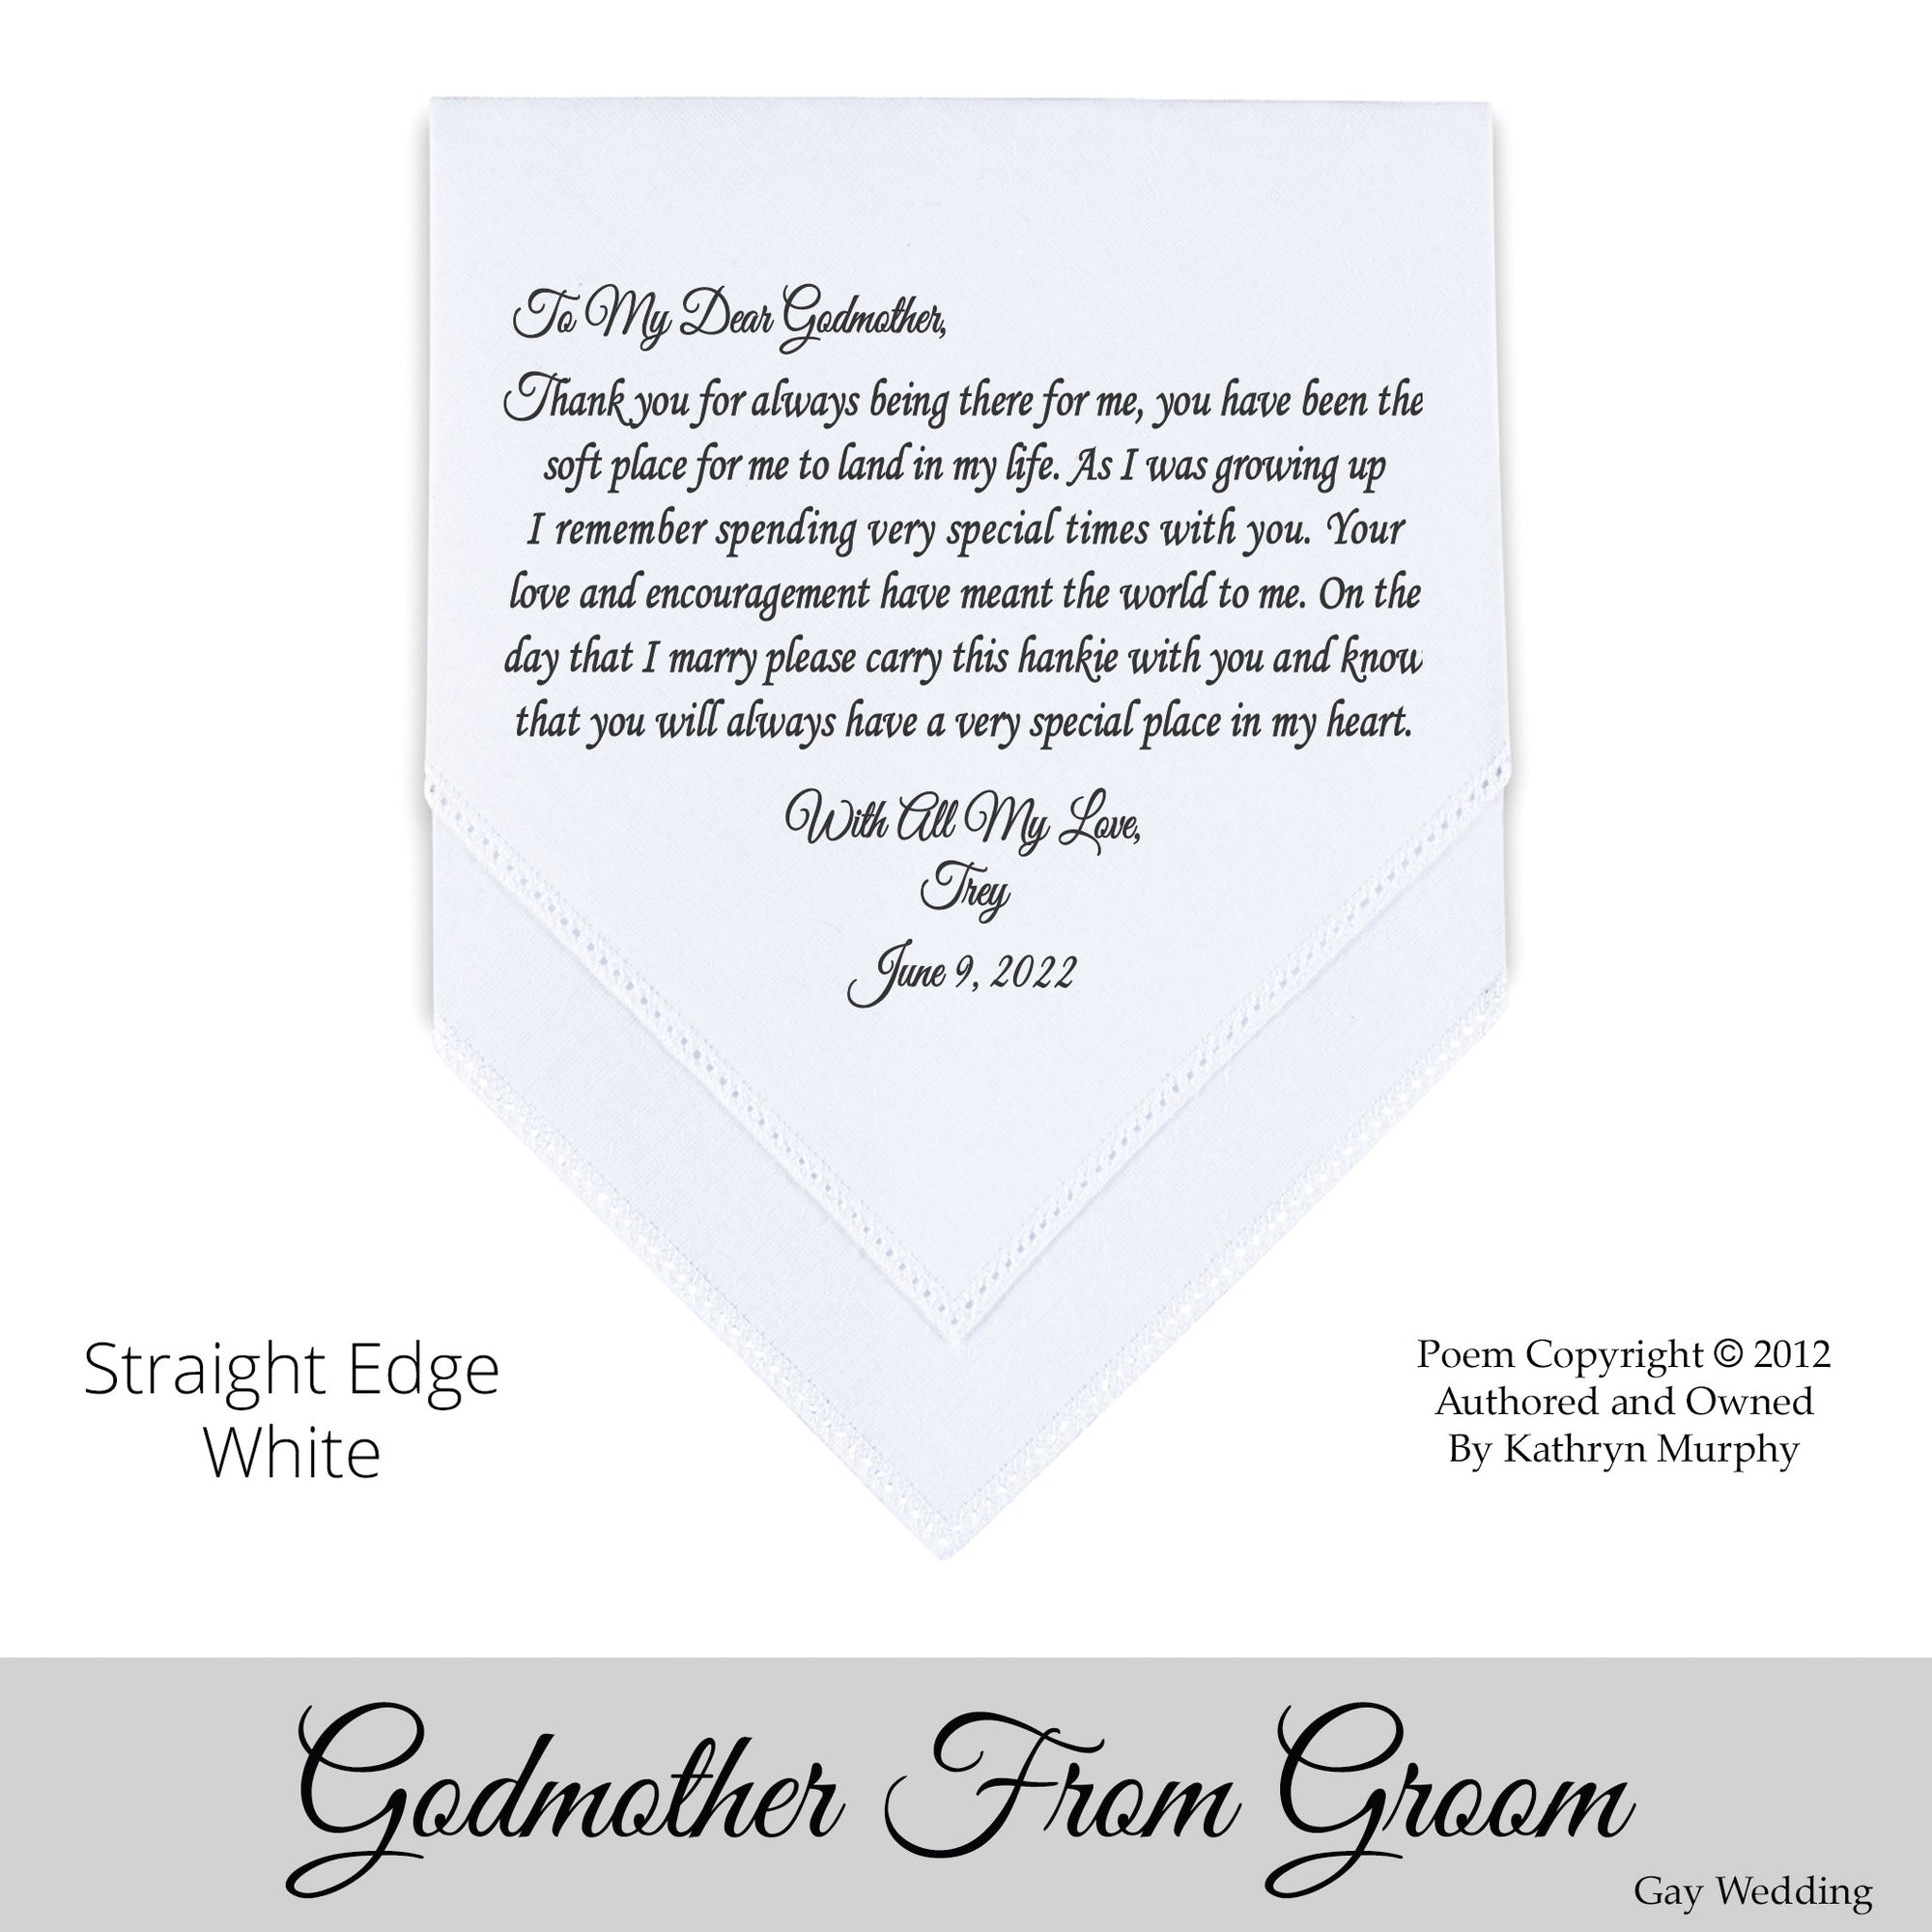 Gay Wedding Gift for the Godmother of the Groom poem printed wedding hankie